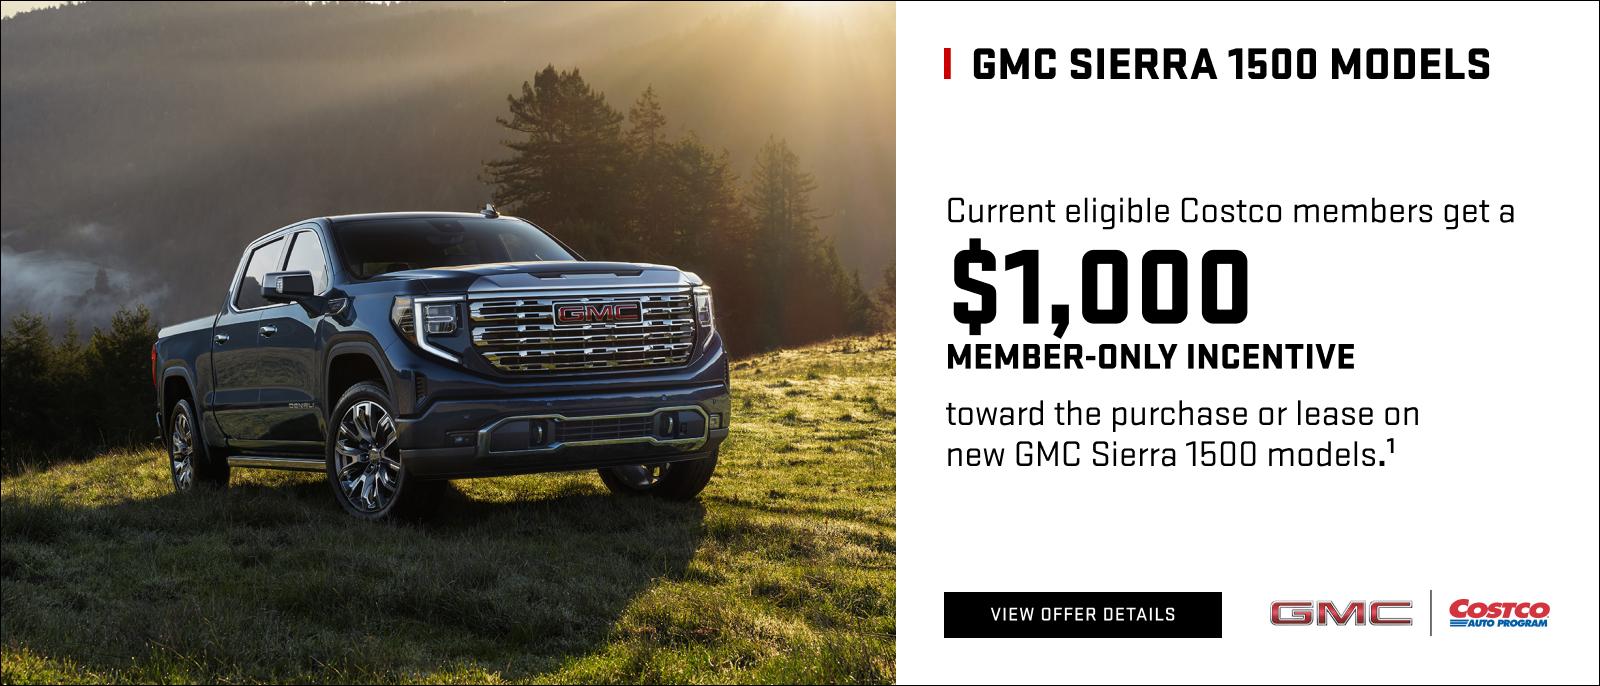 CURRENT ELIGIBLE COSTCO MEMBERS GET A
$1,000 MEMBER-ONLY INCENTIVE
TOWARD THE PURCHASE OR LEASE
ON NEW GMC SIERRA 1500 MODELS1